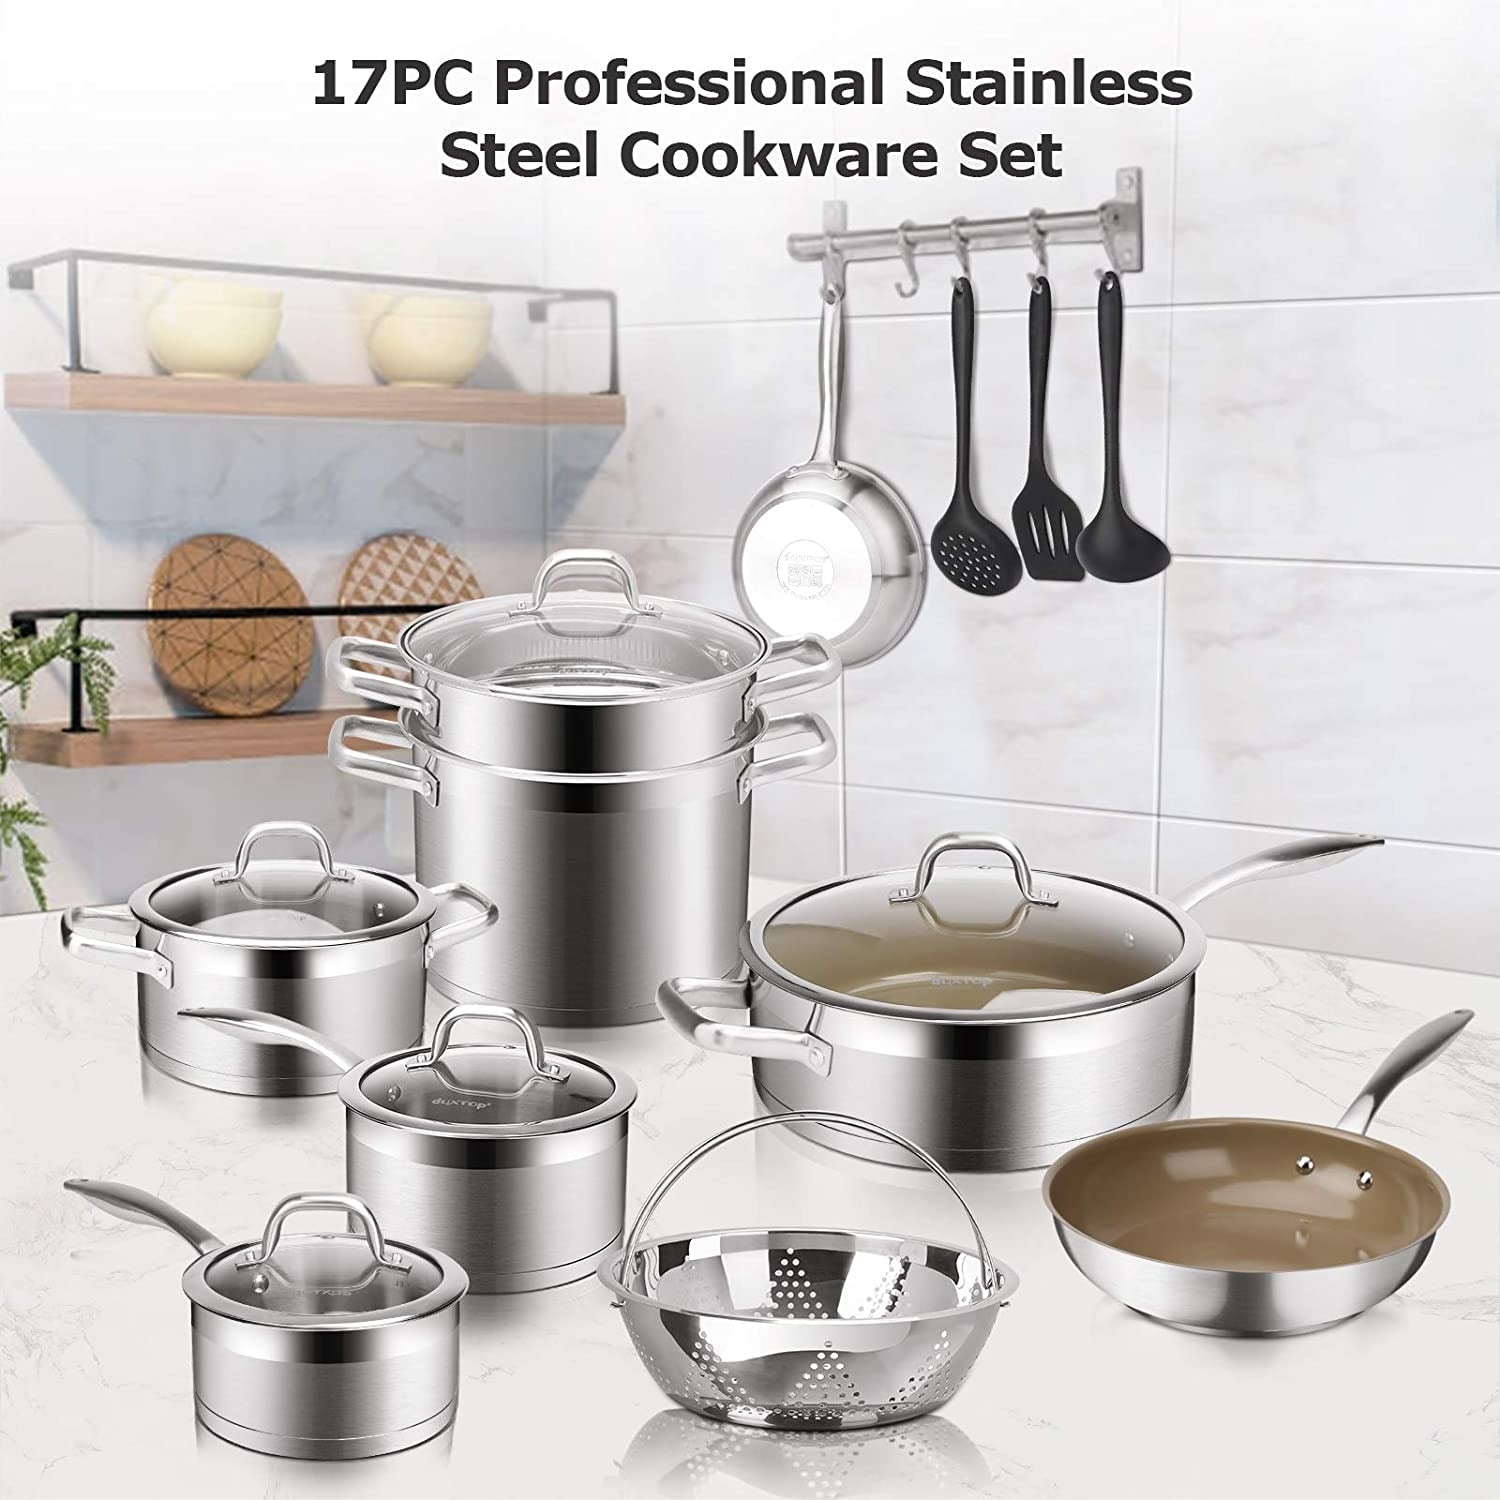 https://ak1.ostkcdn.com/images/products/is/images/direct/55f3a5bf38690d07e9ad96a3da3e9cfbb7ca70e0/17PC-Professional-Stainless-Steel-Induction-Cookware-Set%2C-Stainless-Steel-Ceramic-Nonstick-Pan-Set%2C-Impact-bonded-Technology.jpg